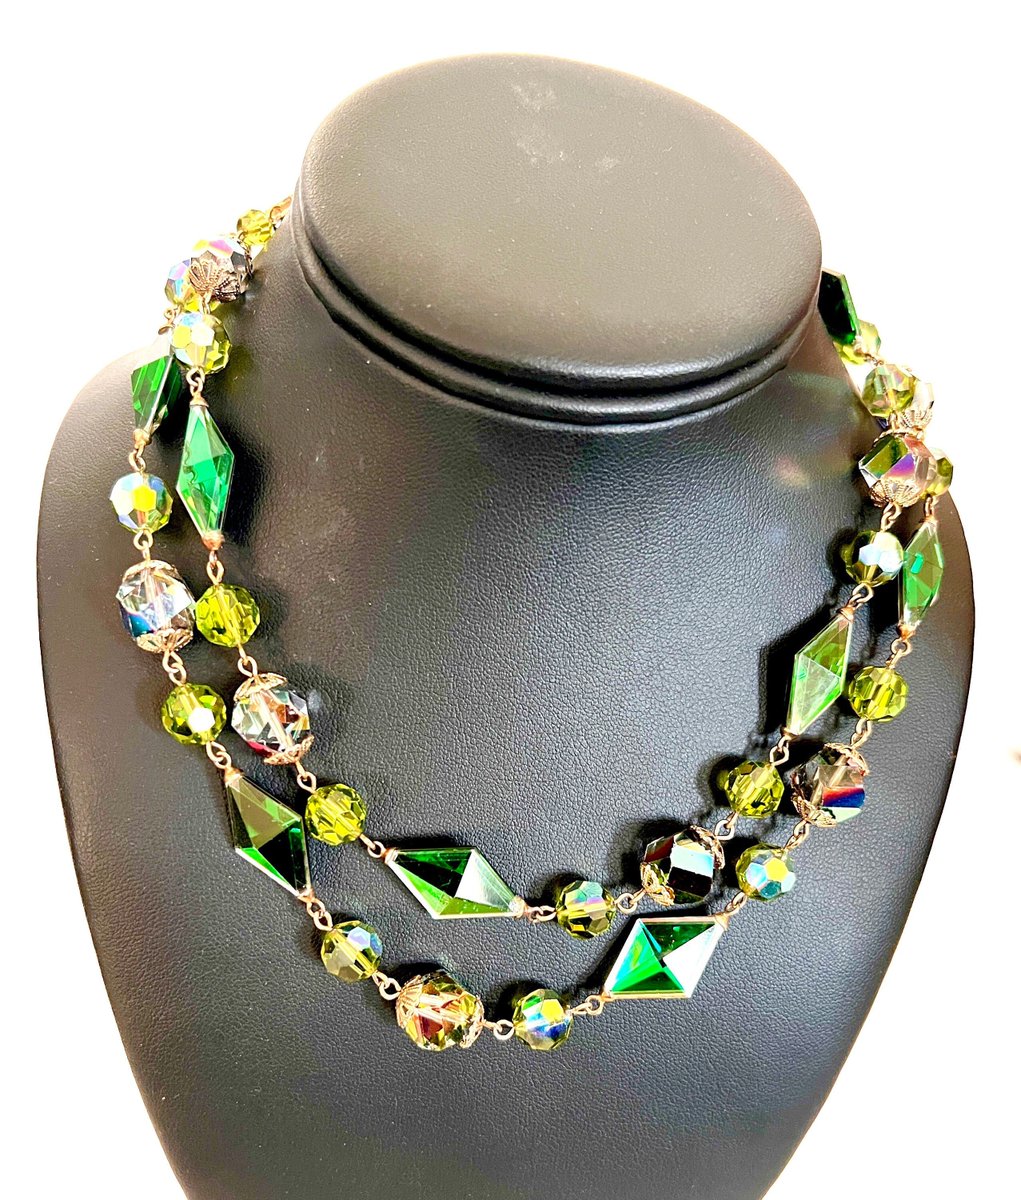 Vendome Green Double Strand Necklace variety of green Crystals Aurora Borealis Beads Signed Gift for Her #GreenCrystals #VendomeNecklace $155.00 ➤ etsy.com/listing/171357…